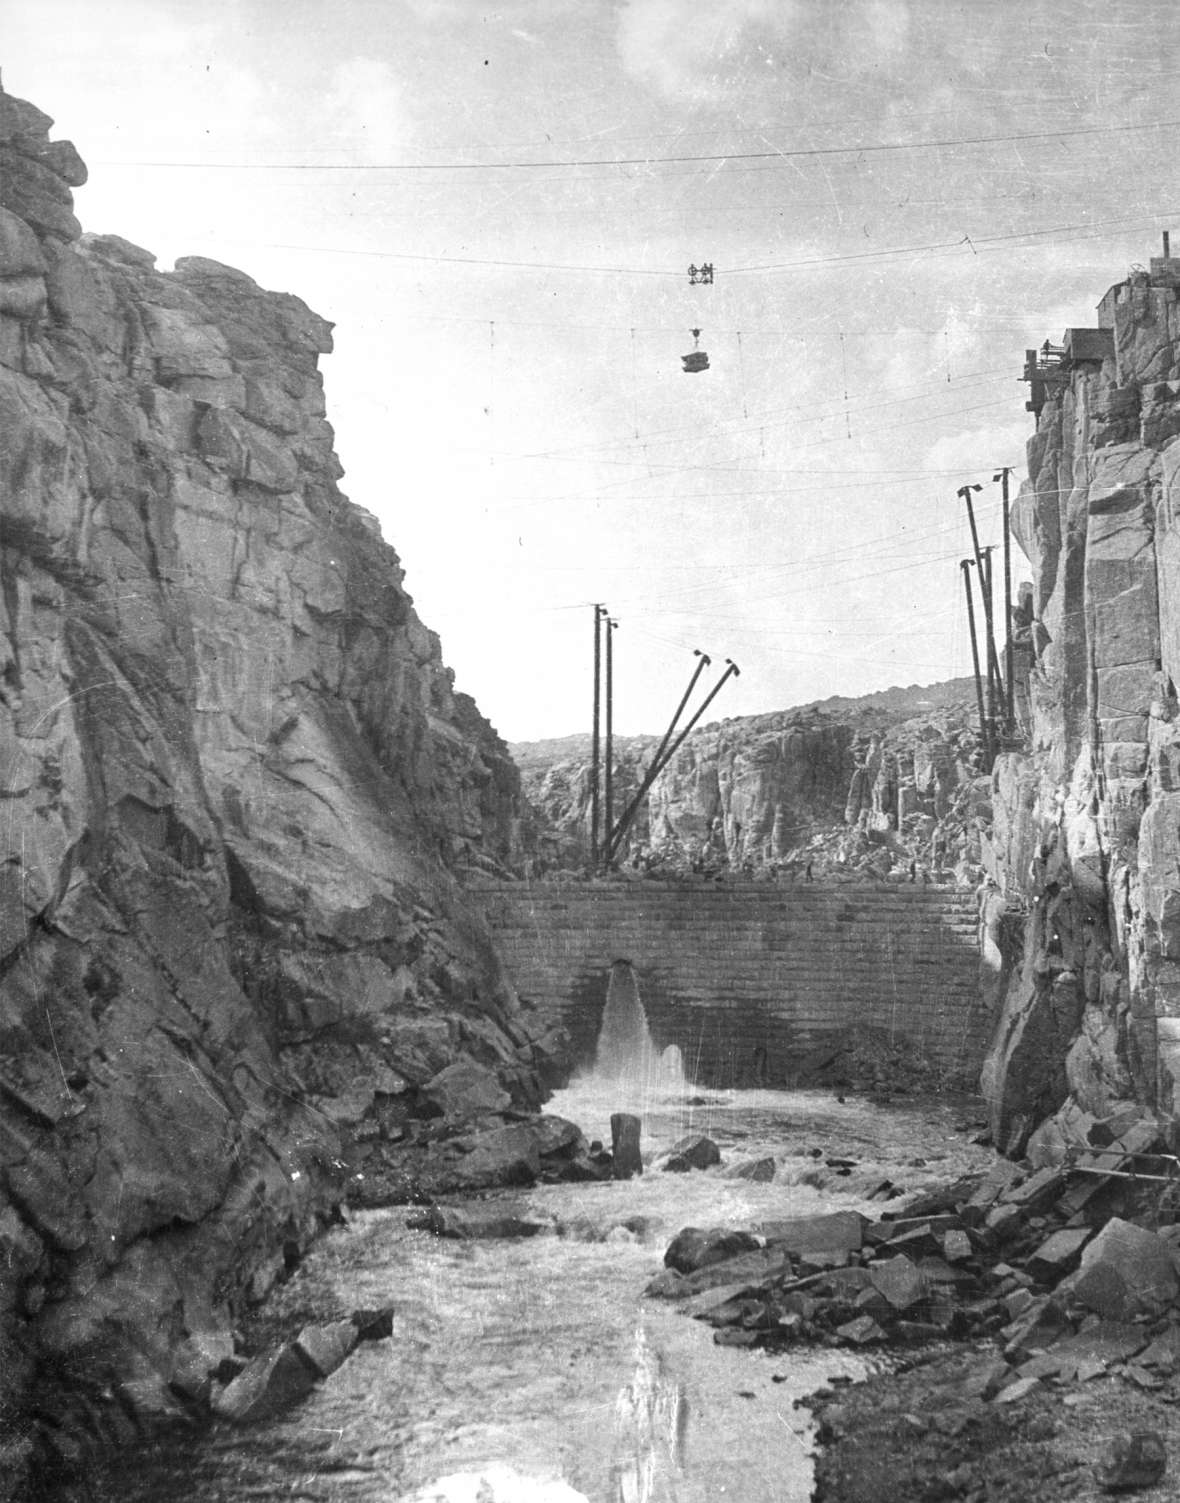 Pathfinder Dam on the North Platte River, built of granite blocks and shown here under construction about 1906, was one of the first built by the new U.S. Reclamation Service. Casper College Western History Center.